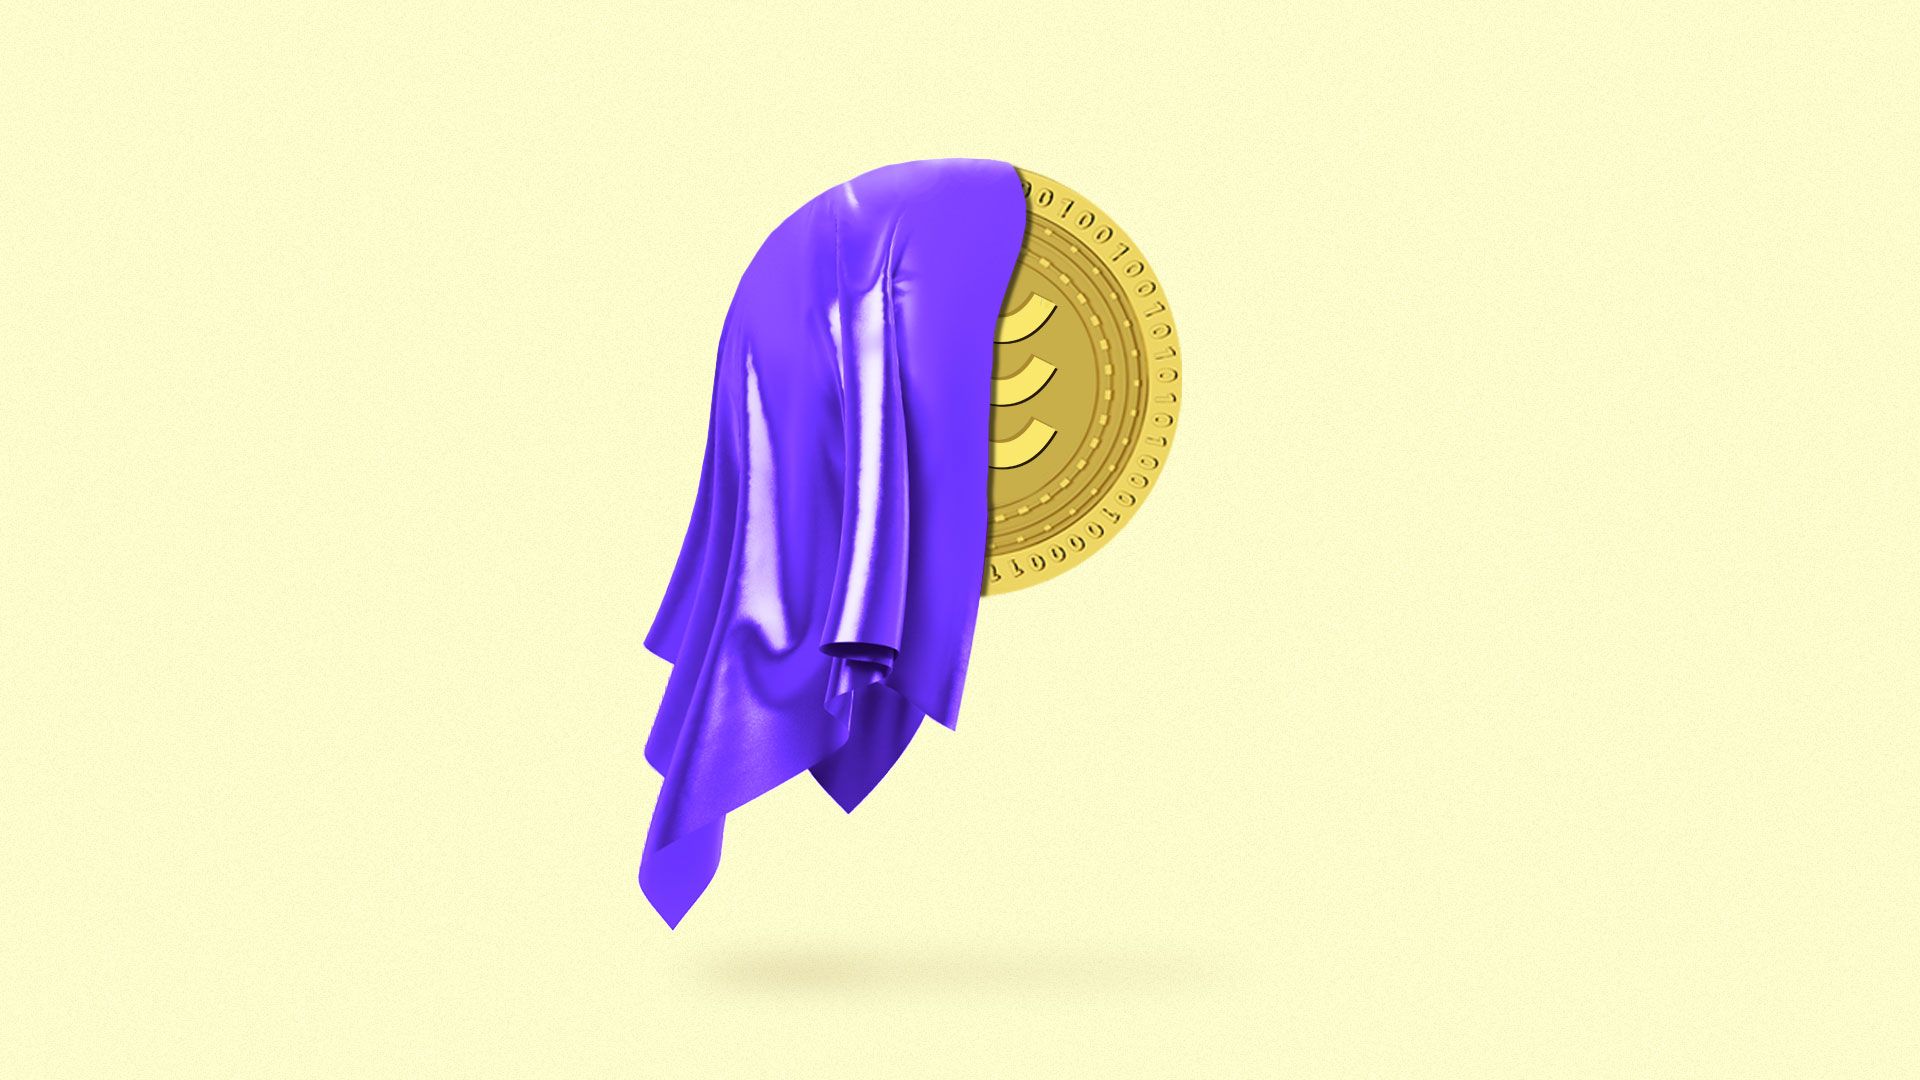 Illustration of a crypto coin with the libra logo on its face being revealed from underneath a cloth.